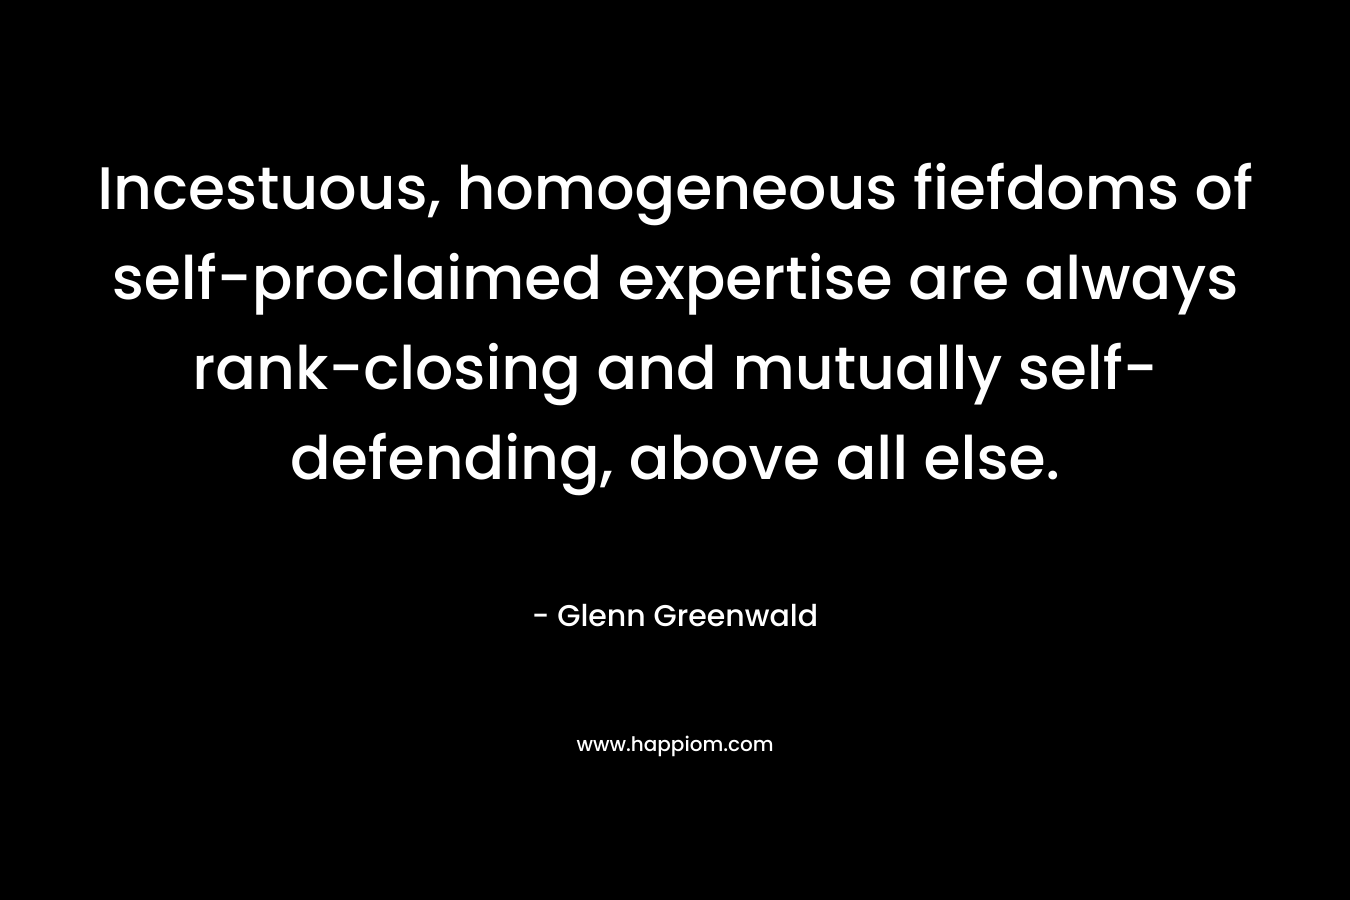 Incestuous, homogeneous fiefdoms of self-proclaimed expertise are always rank-closing and mutually self-defending, above all else. – Glenn Greenwald